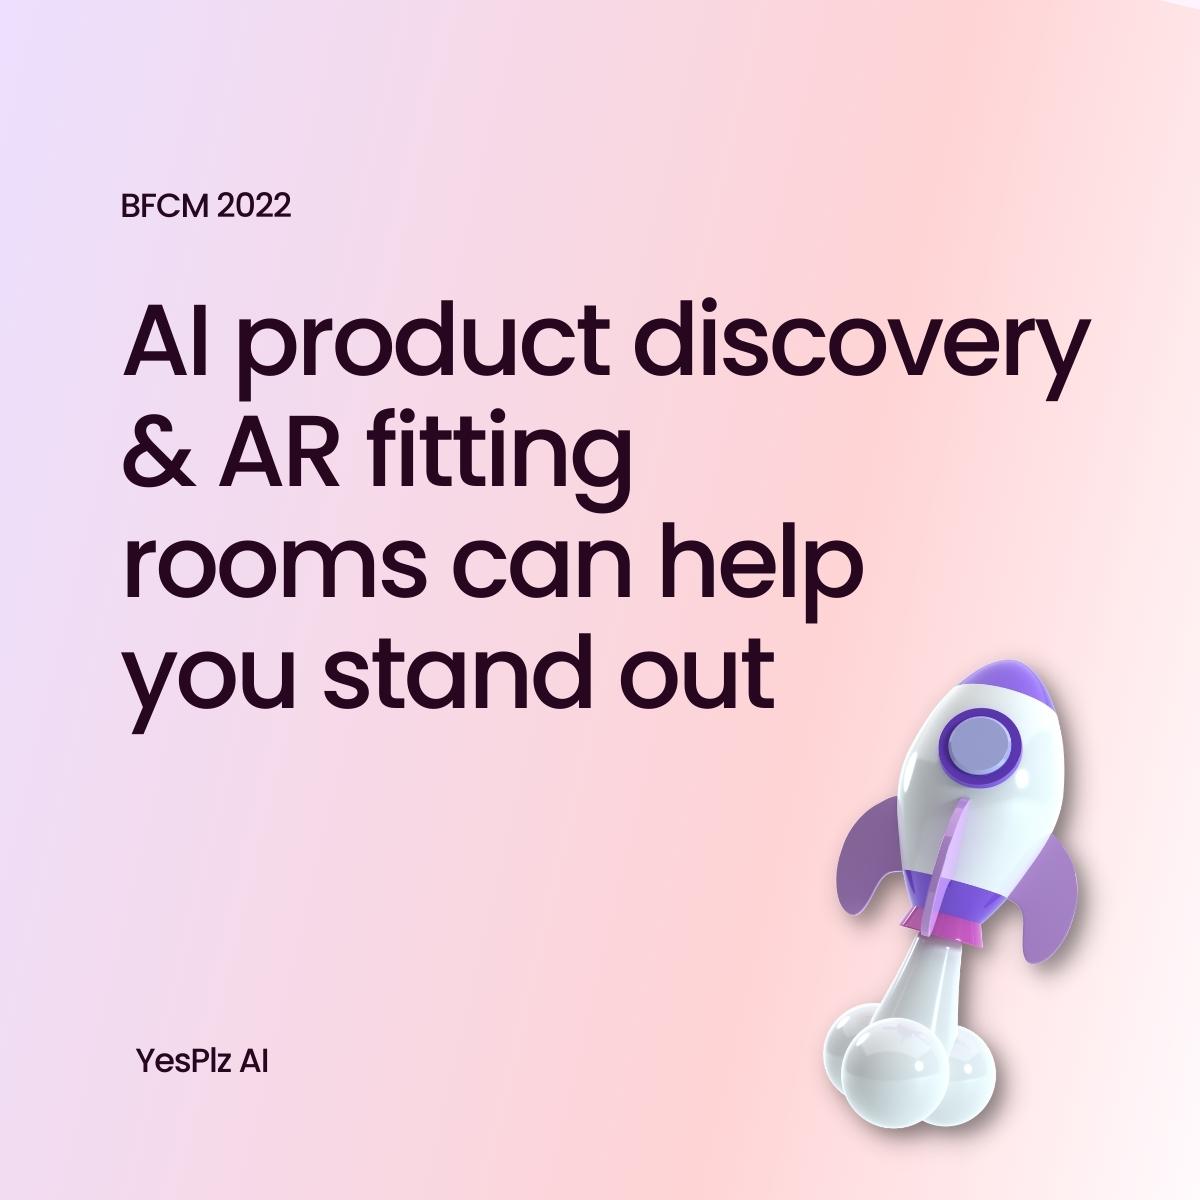 AI product discovery and AR fitting room tips for BFCM 2022 with rocket ship